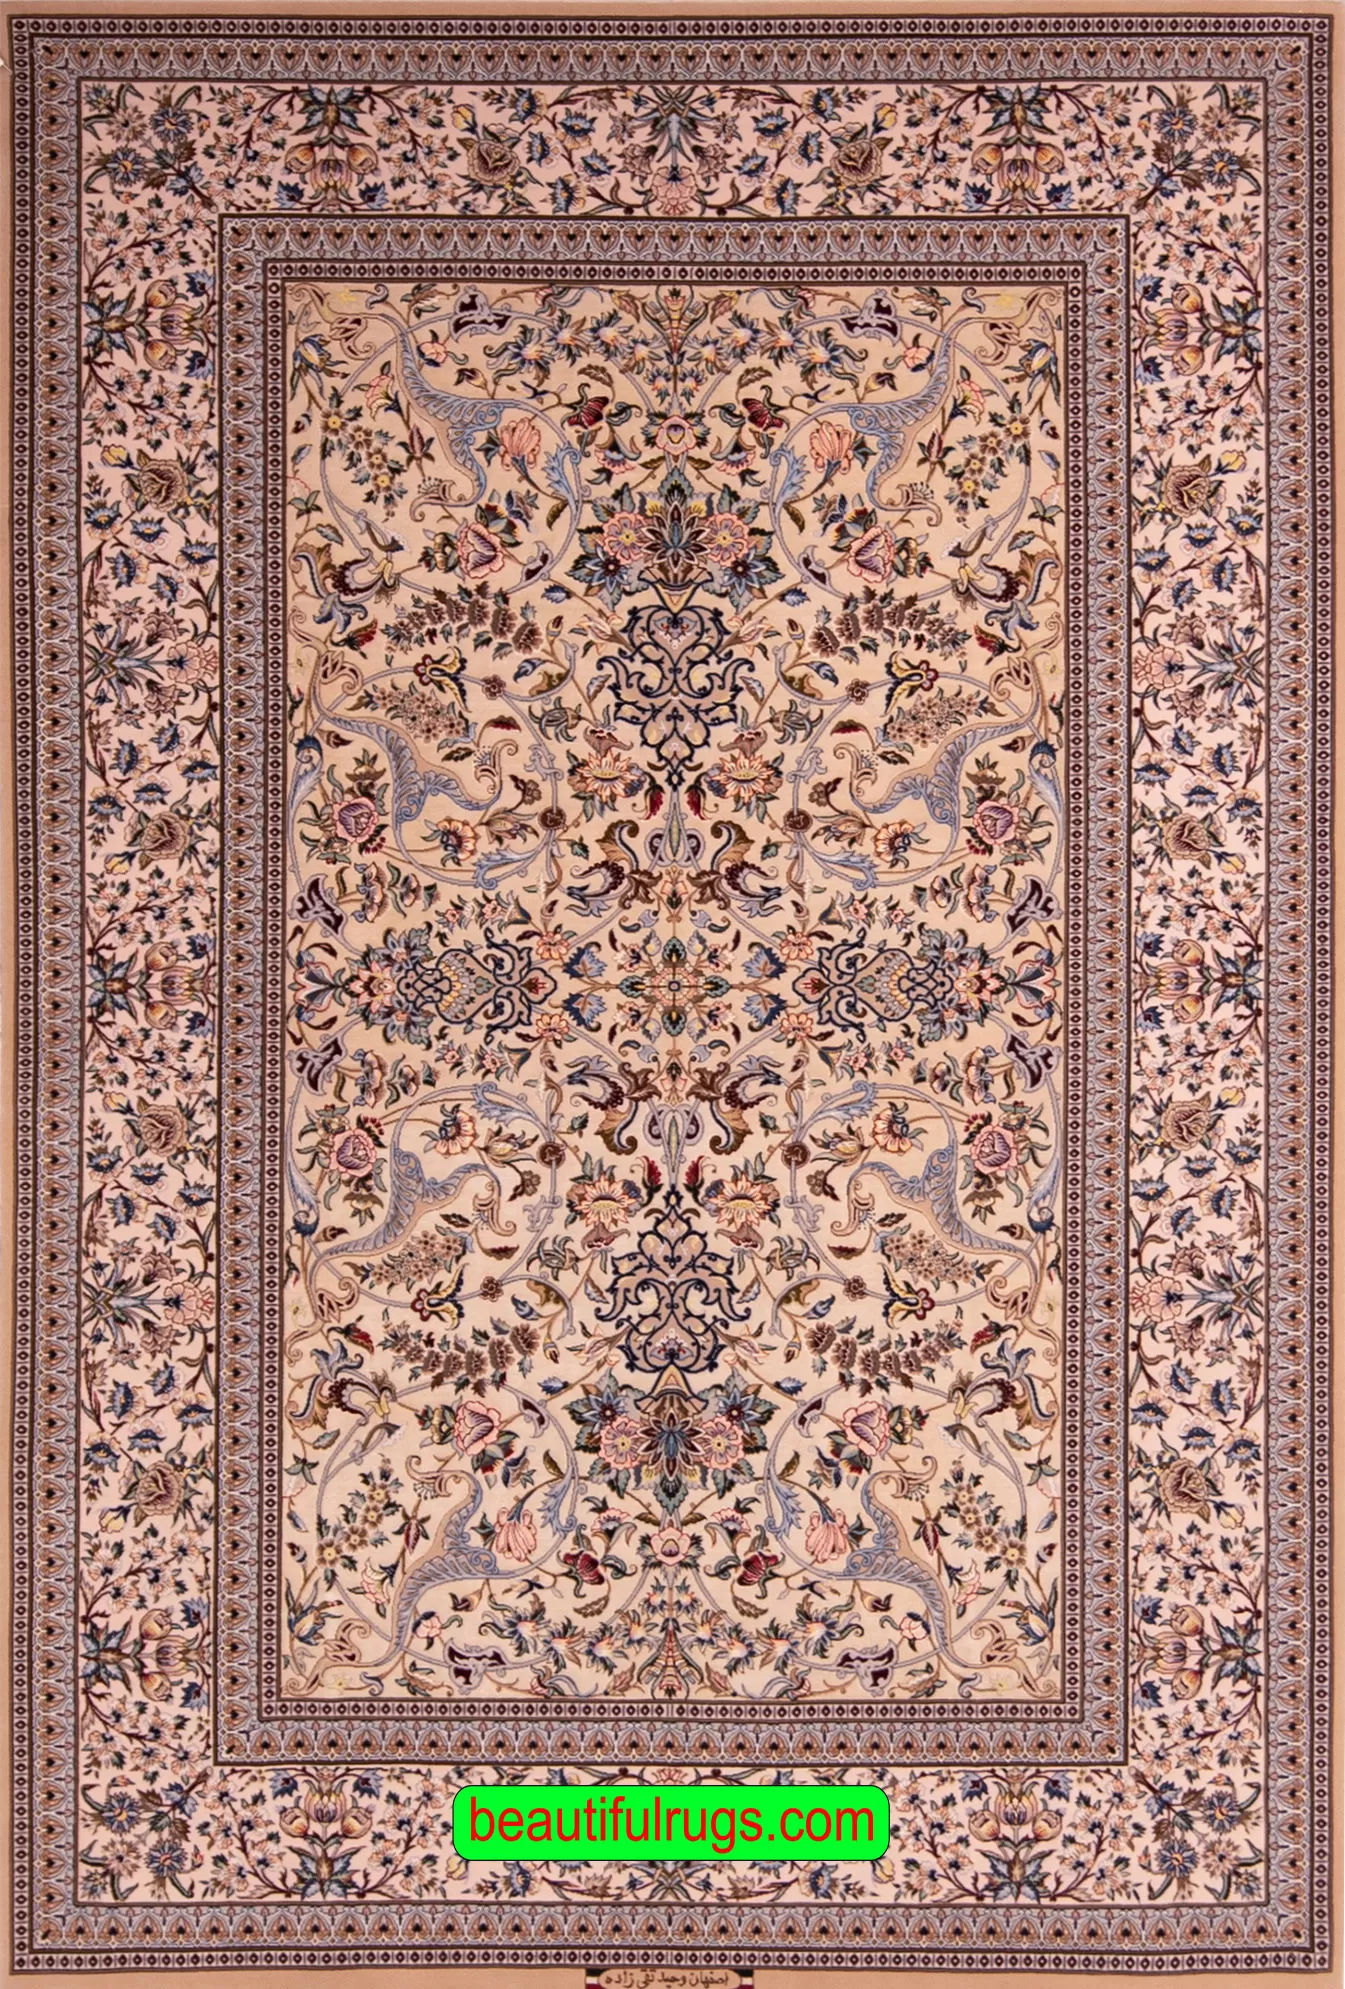 122 SHA- Hand Knotted Persian Isfahan Rug, Marble Color Kurk Wool and Silk Rug. Size 5x7.7